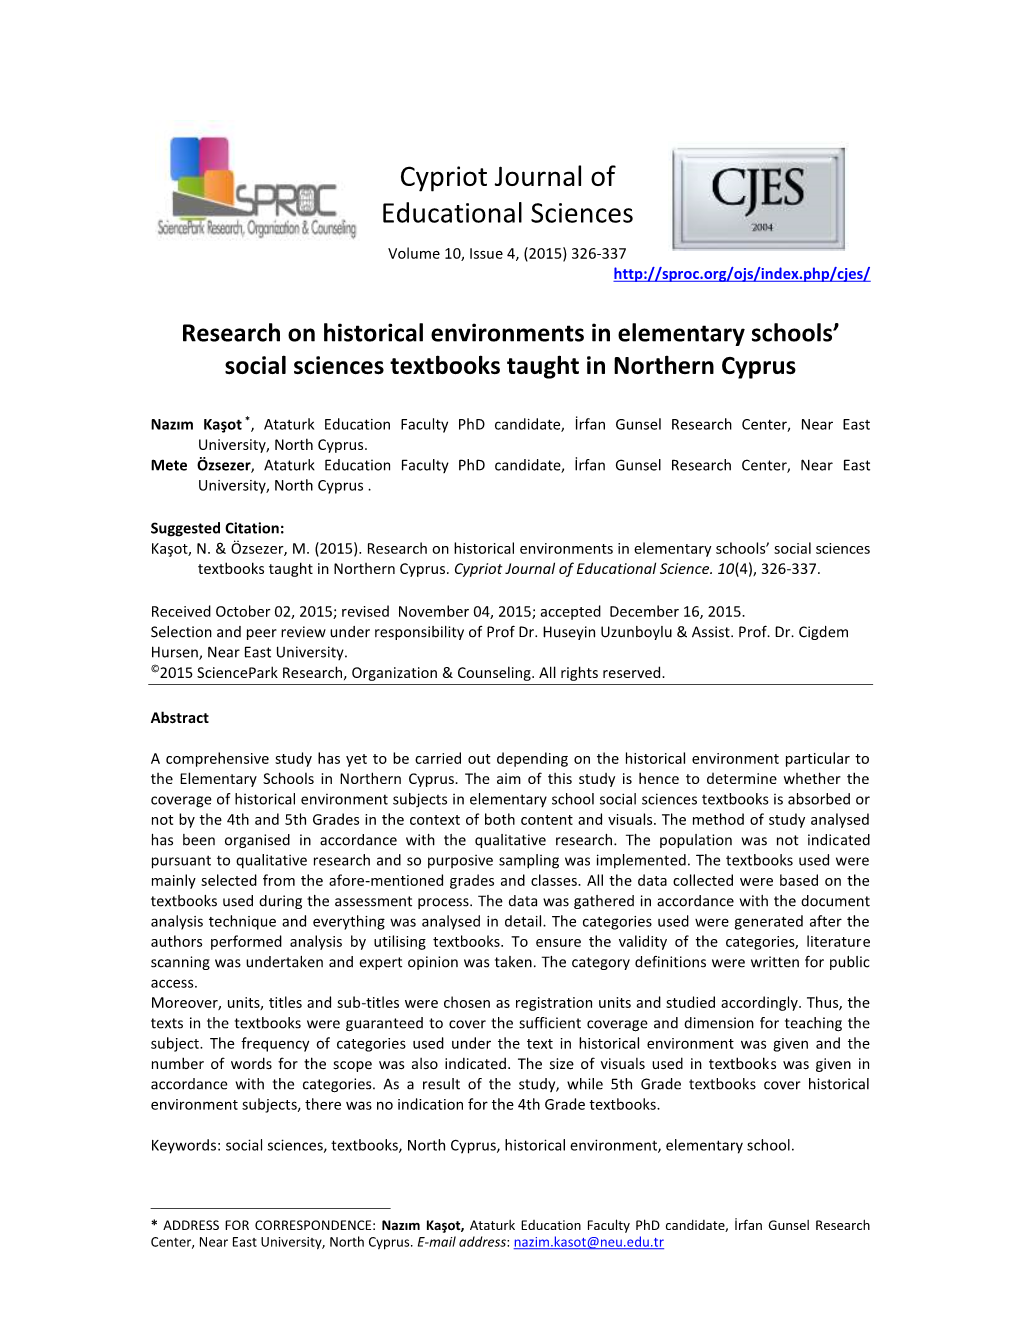 Research on Historical Environments in Elementary Schools' Social